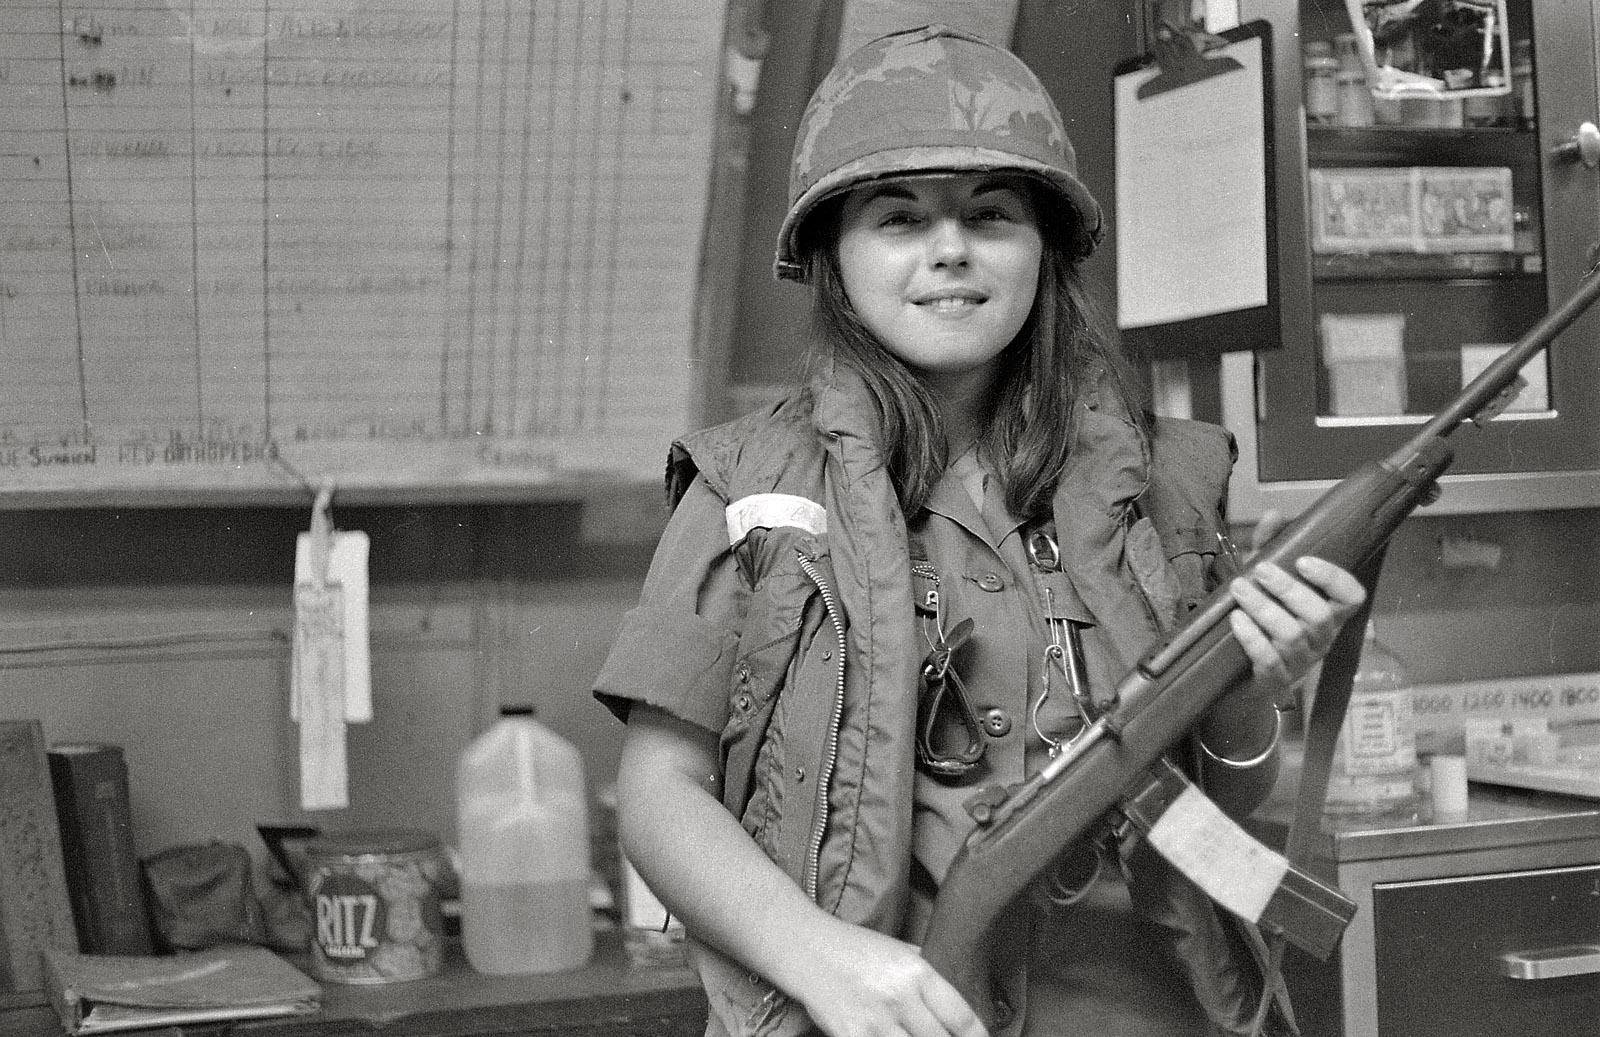 My mother in Vietnam, 1969.  Her hospital was on alert for one reason or another, and she decided to have a picture taken with a soldier's M1 carbine.  As a nurse, she of course didn't have her own personal weapon. View full size.